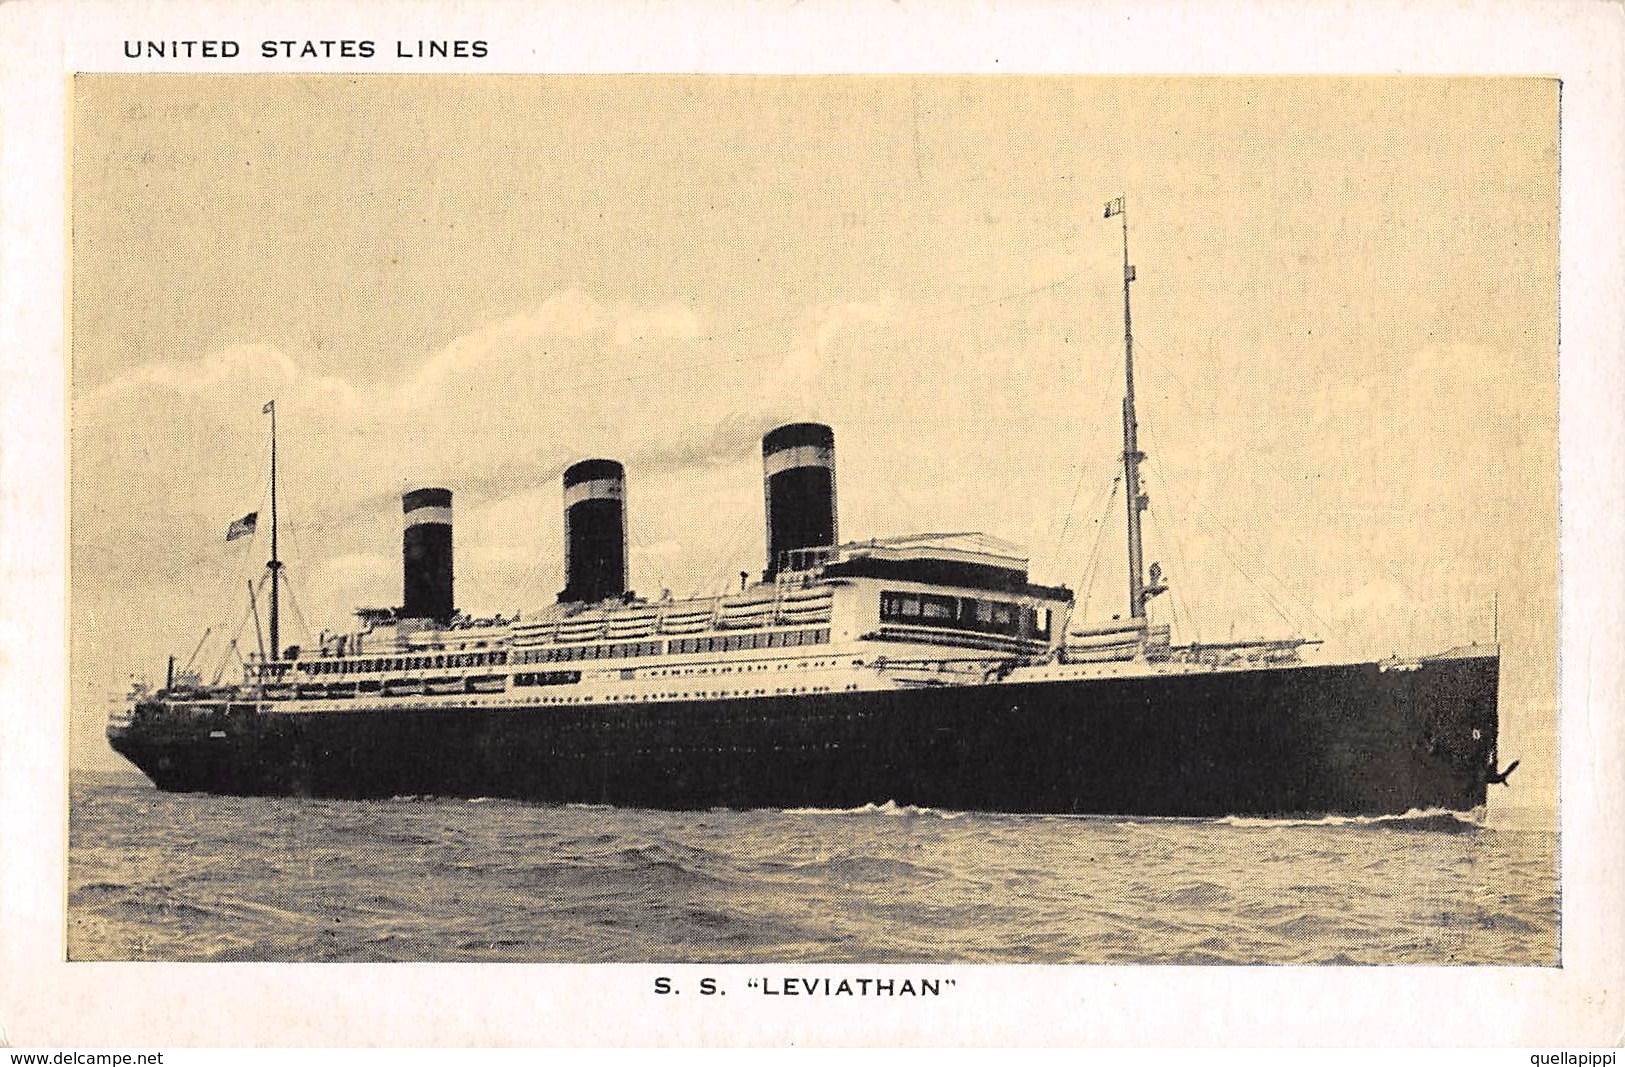 05826 "TRANSATLANTICO S.S. LEVIATHAN - 65640 TONS - INITED STATES LINES" CART SPED - Banques